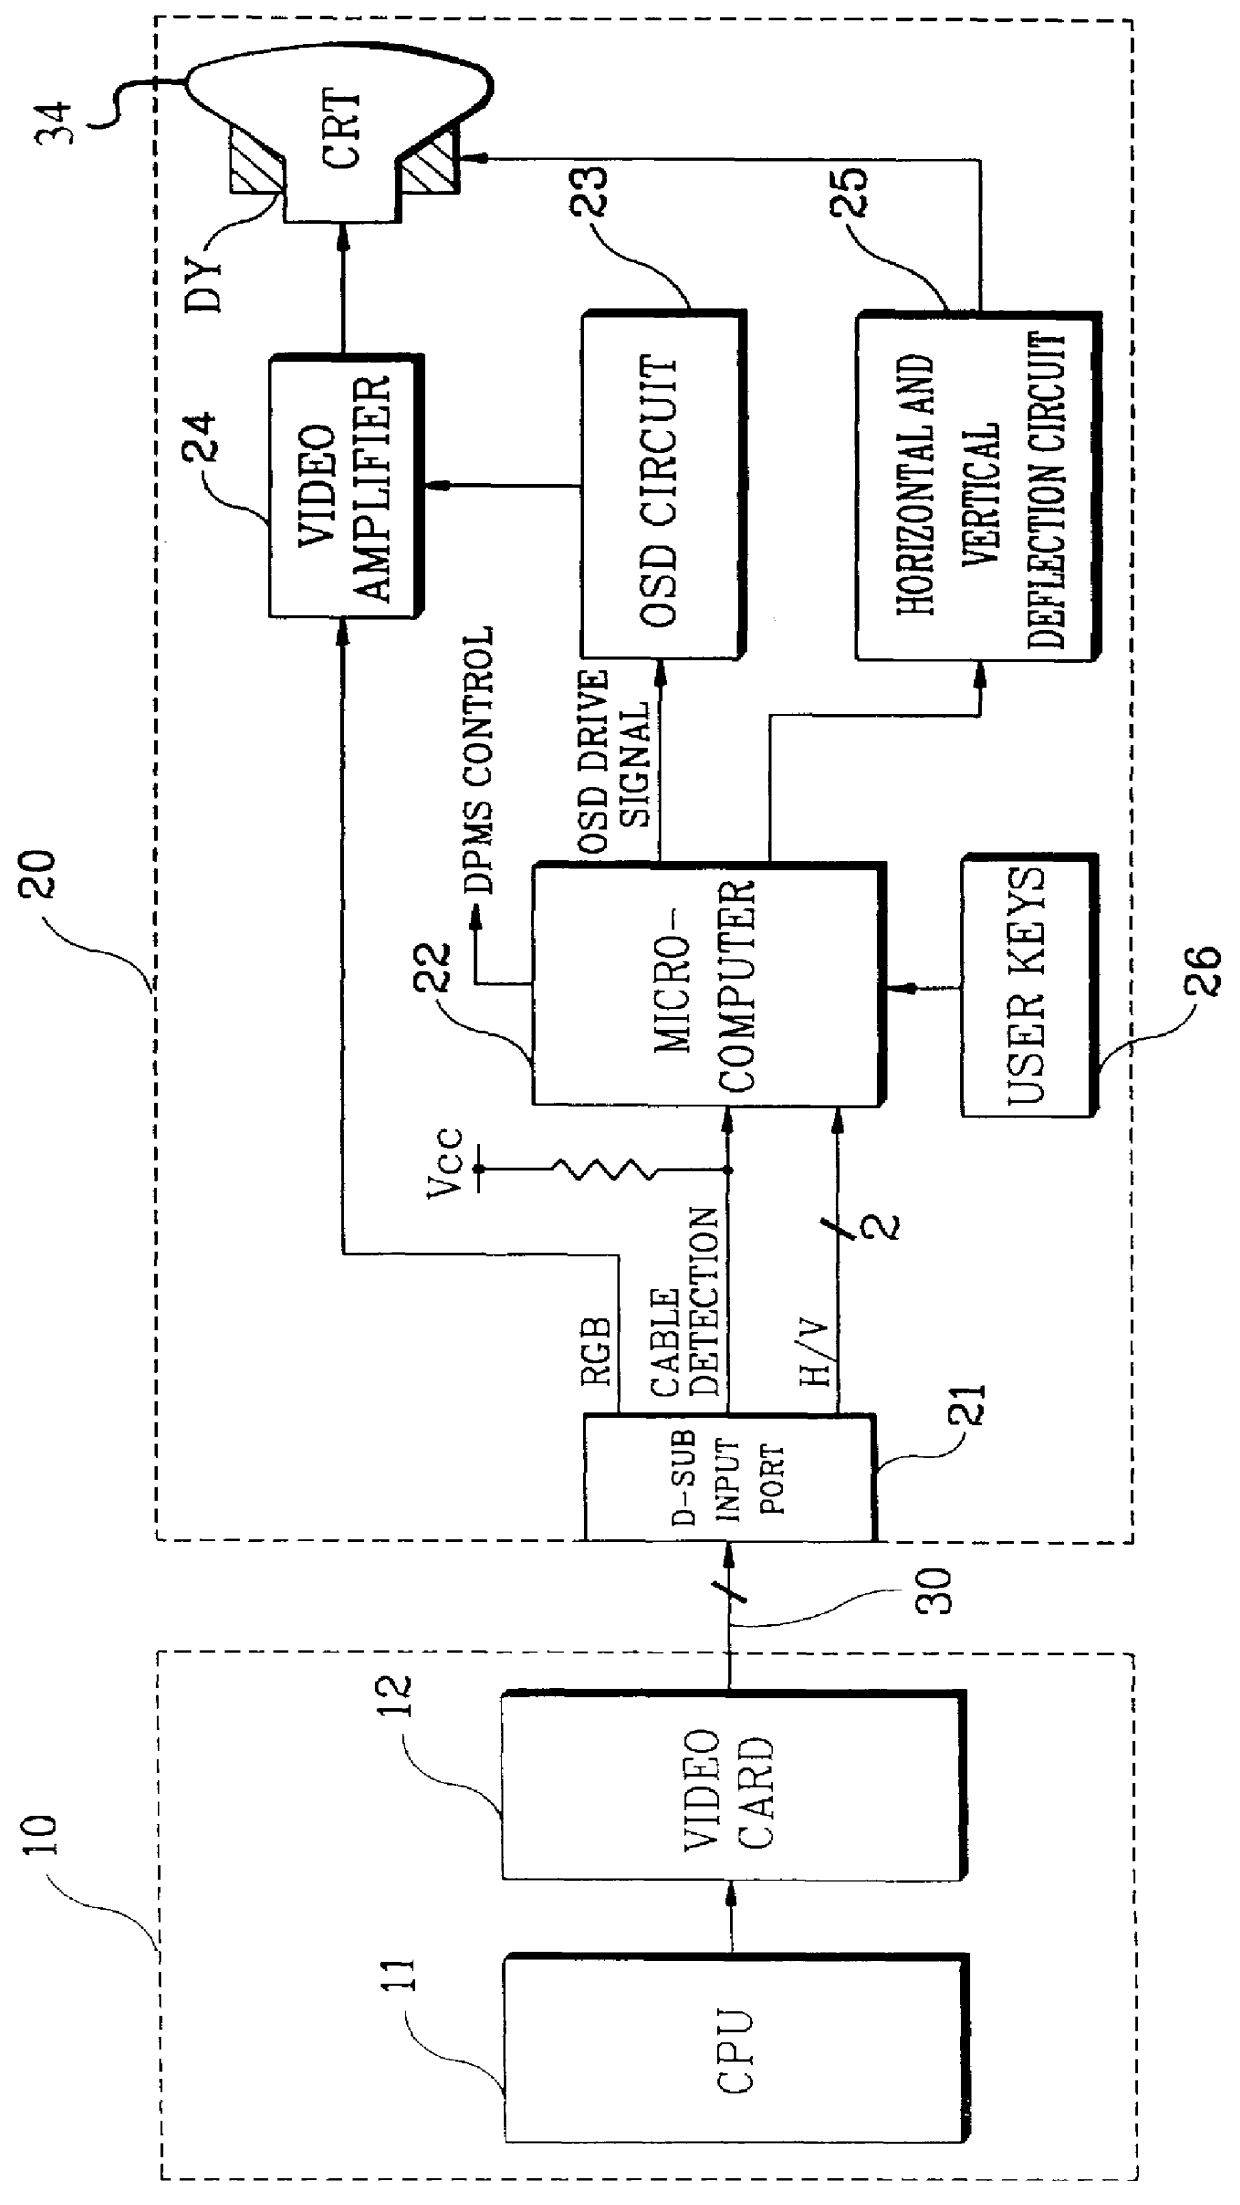 Apparatus and method for displaying DPMS mode status using an OSD circuit